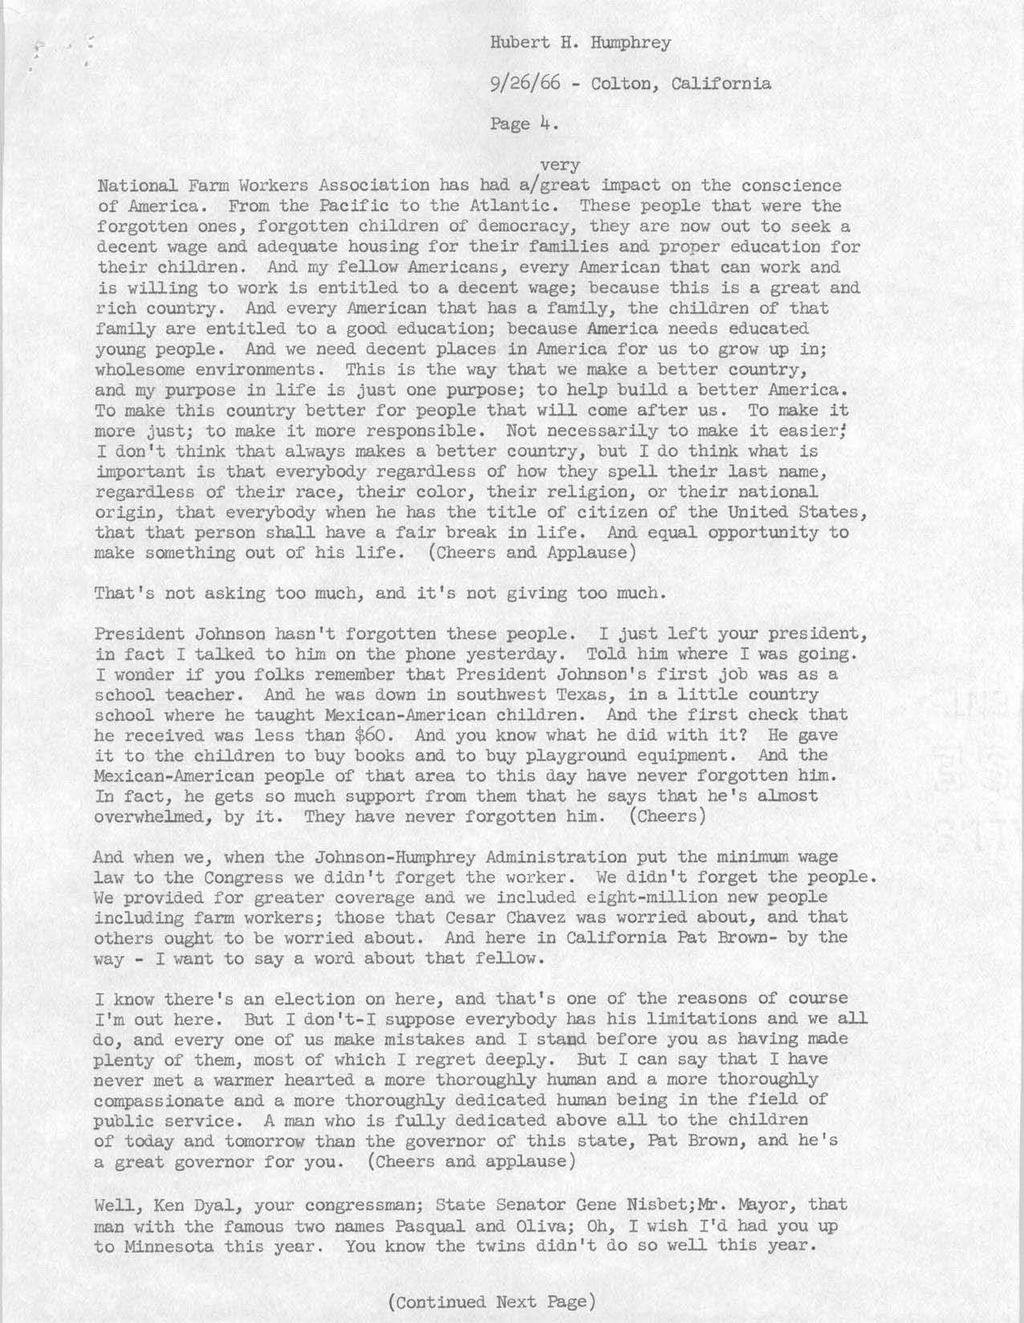 Hubert H. Humphrey 9/26/66 - Colton, California Page 4. very National Farm Workers Association has had a/great impact on the conscience of America. From the Pacific to the Atlantic.